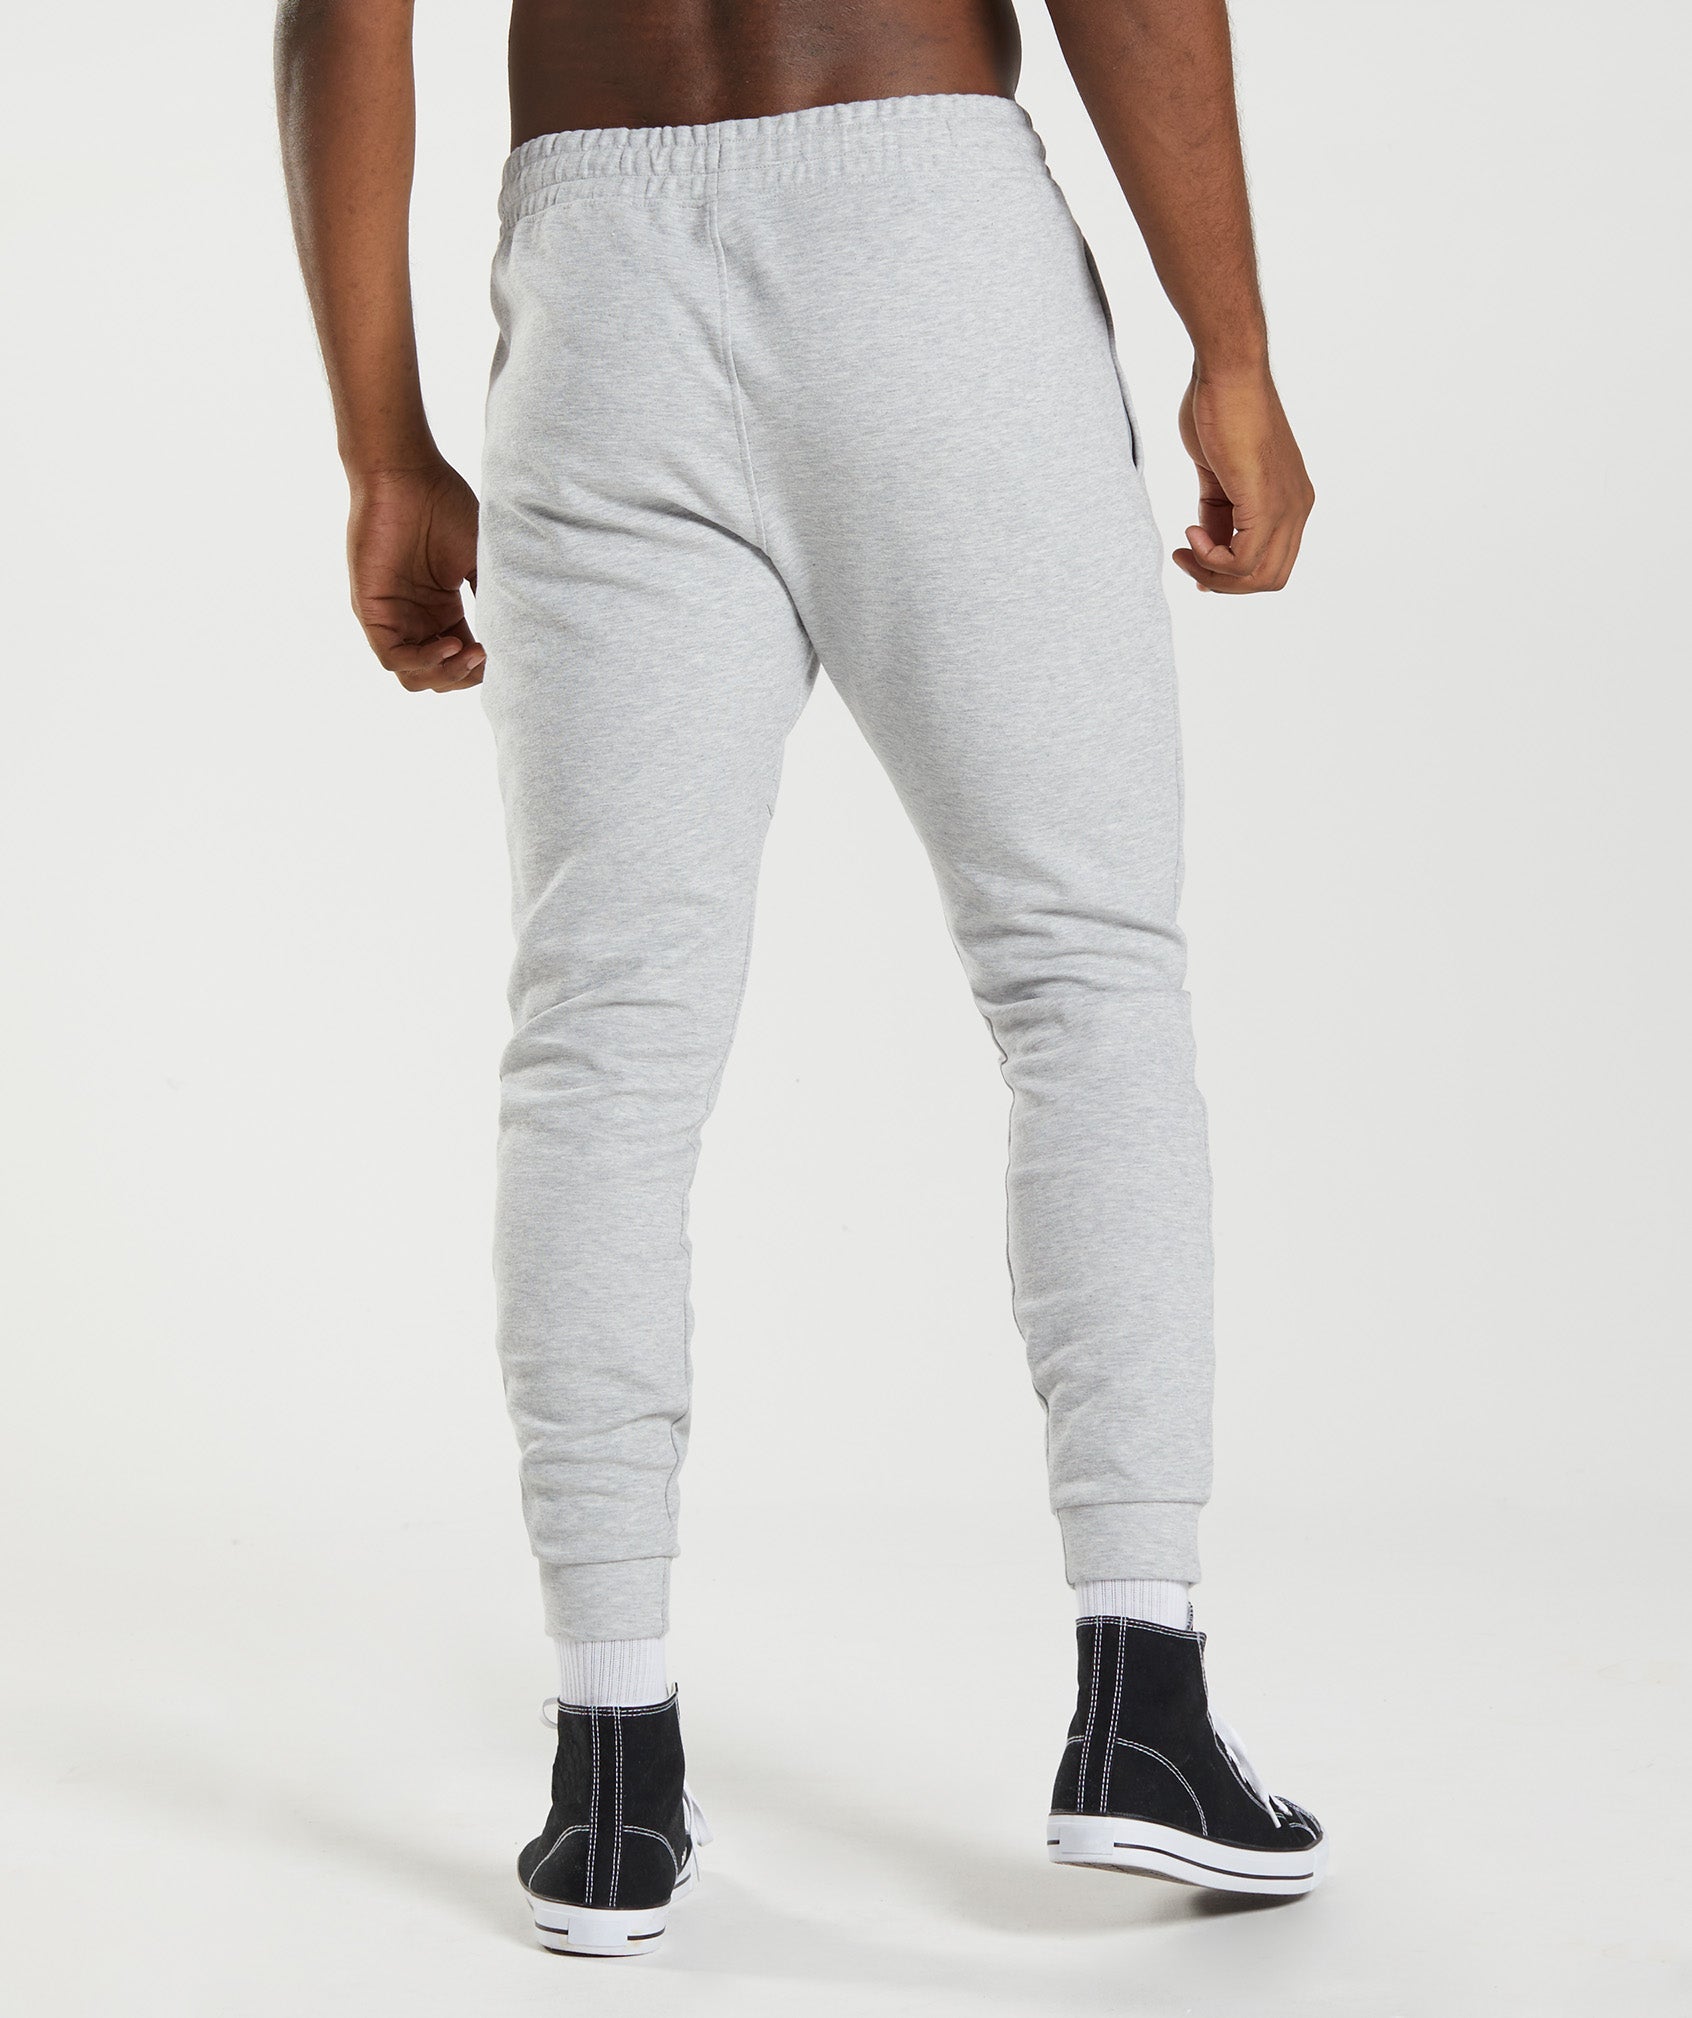 RELAXED FIT JOGGER PANTS - Gray marl